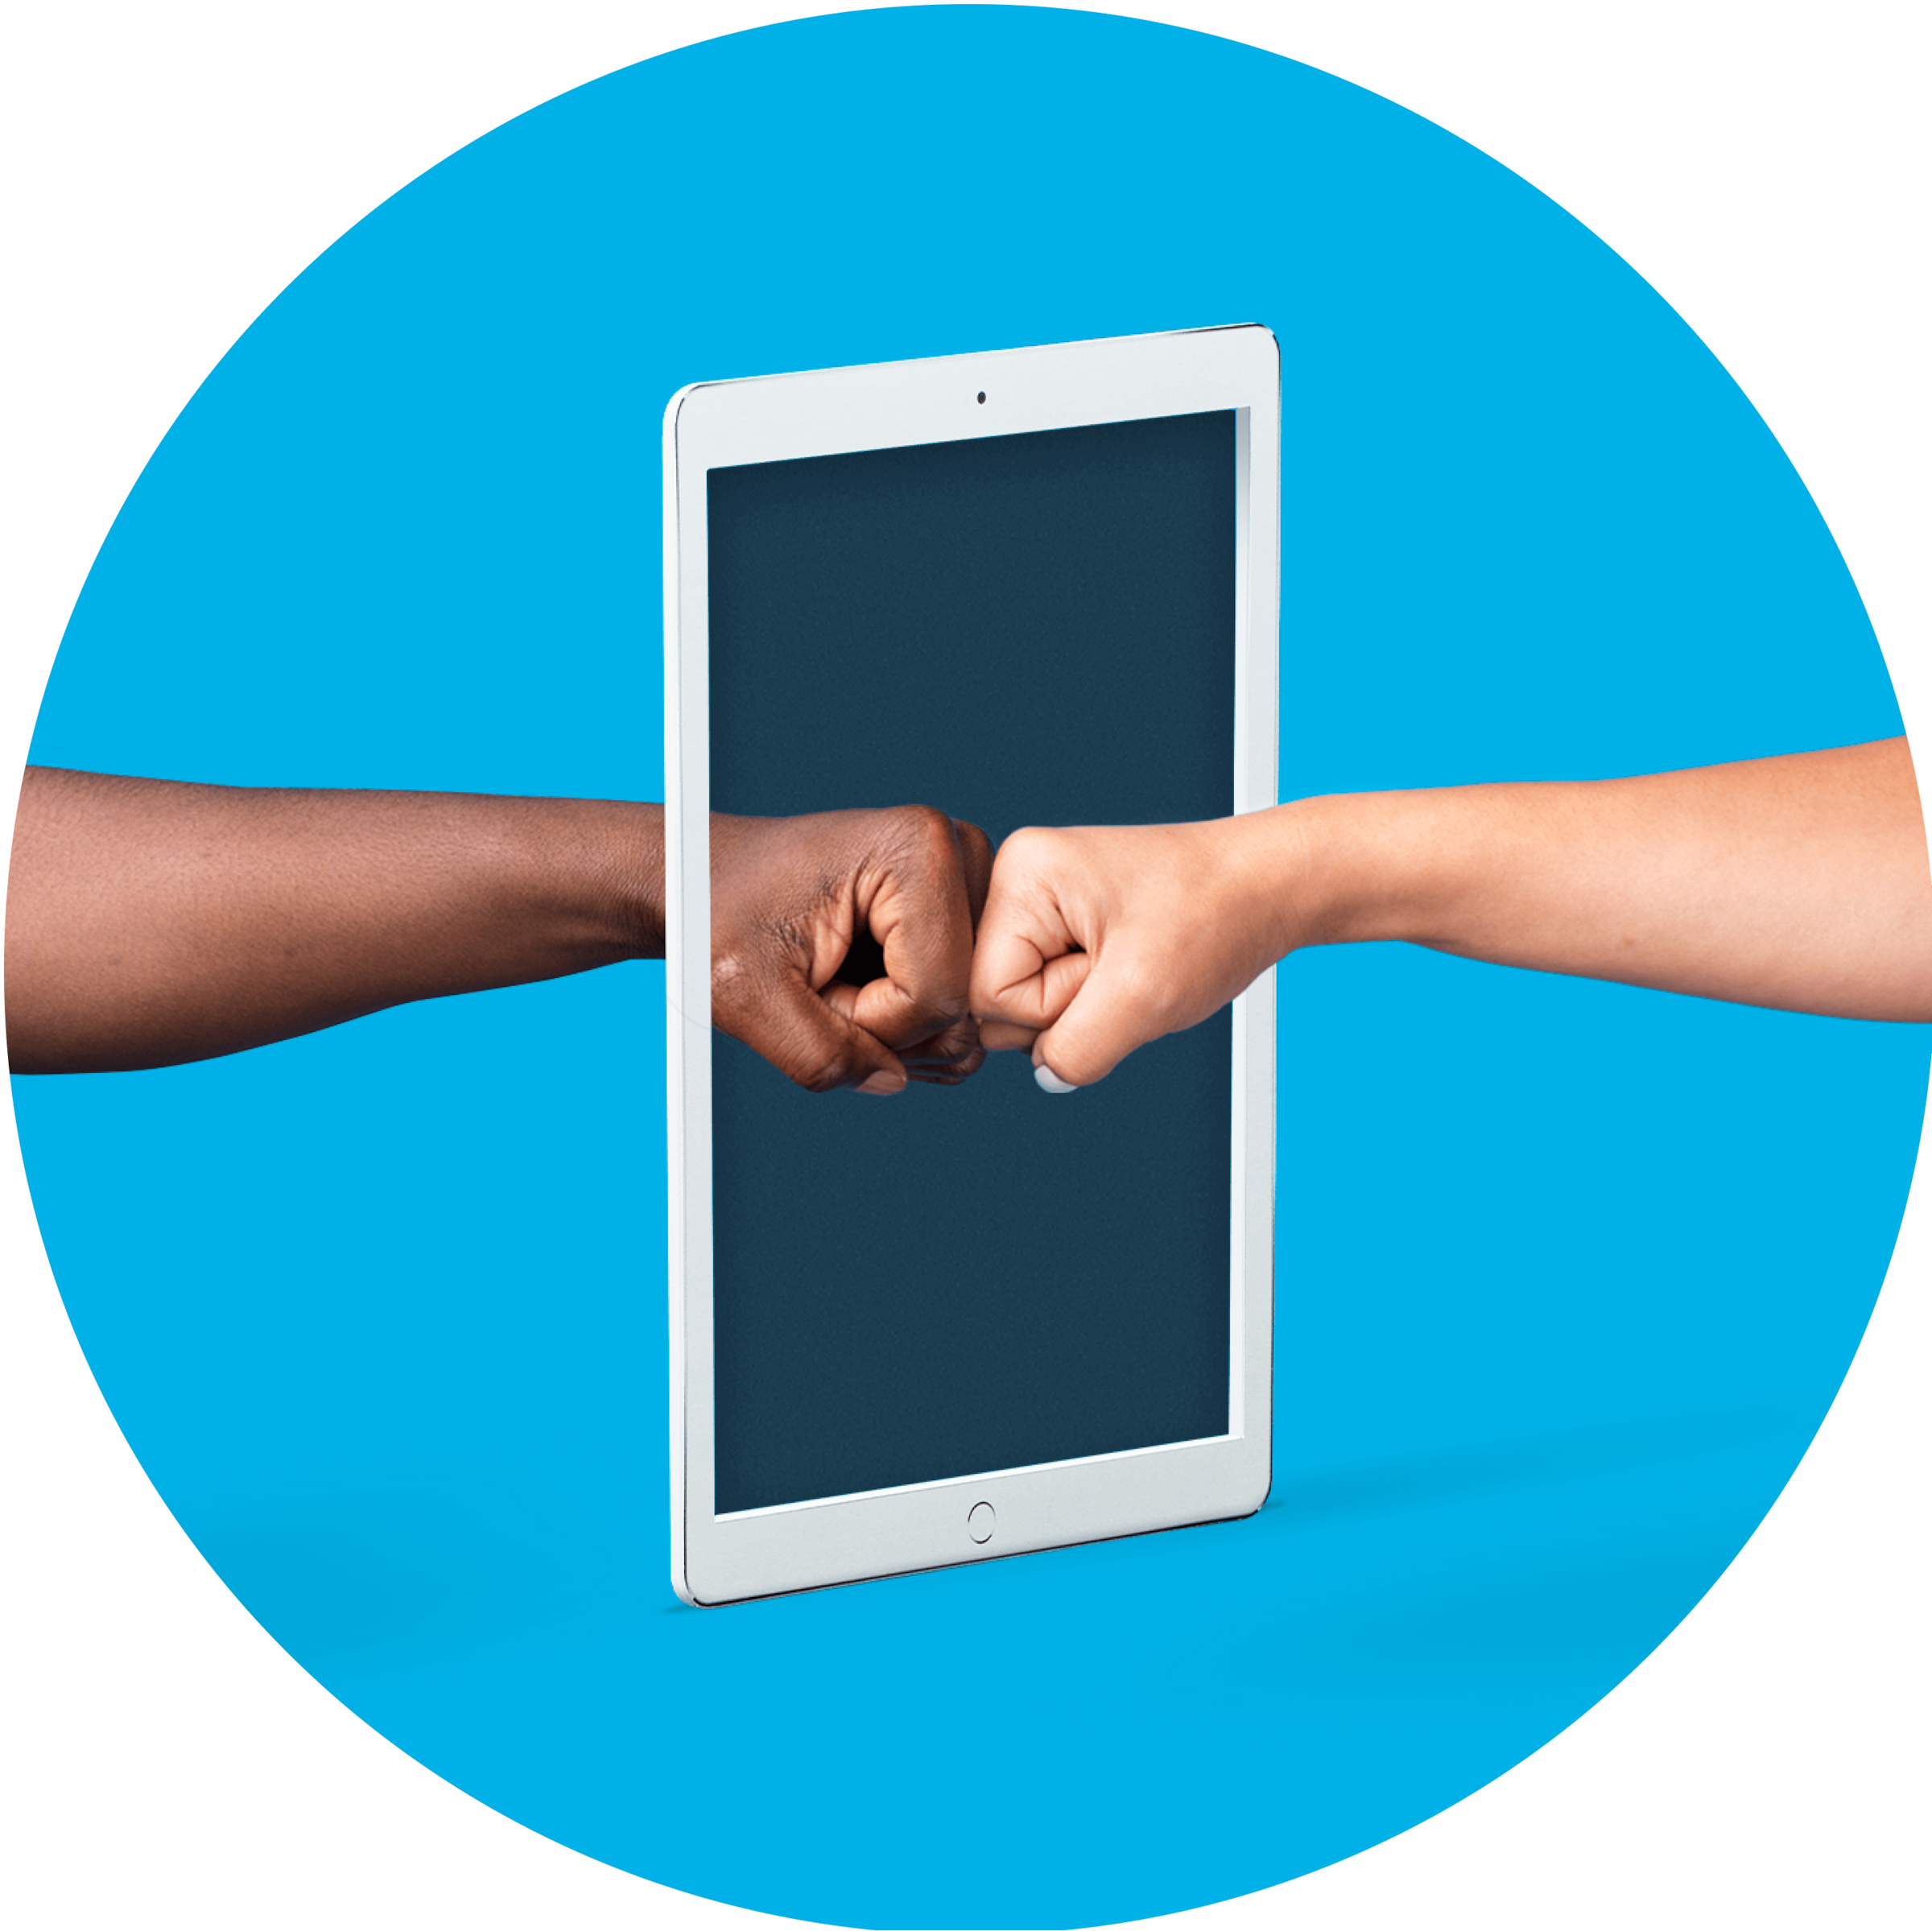 Two hands fist bump through a device to show that collaborating with a team in Xero is direct, easy and instant.